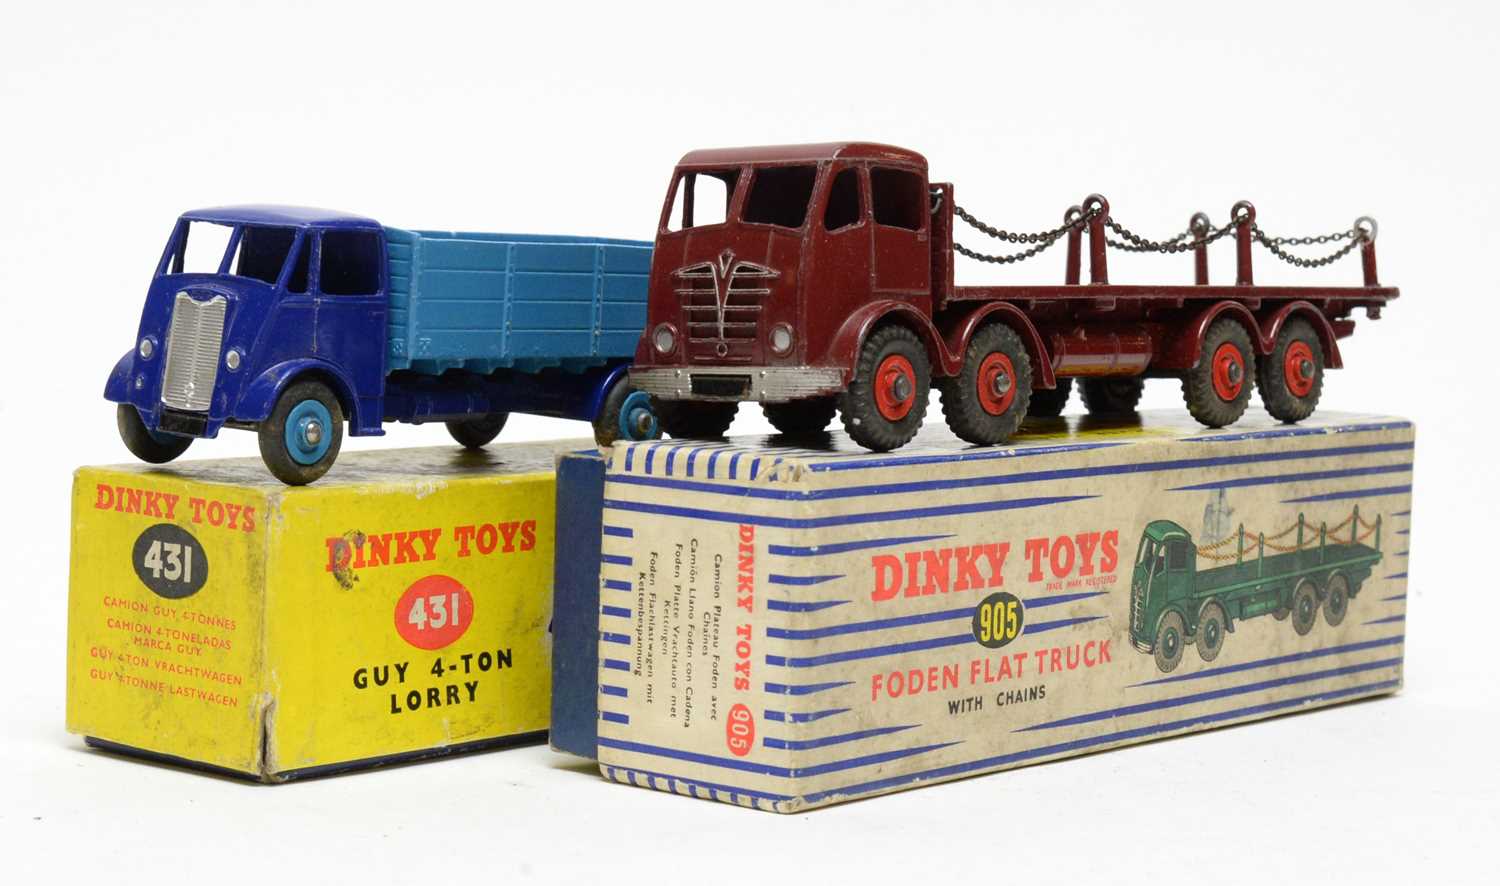 Lot 835 - Dinky Toys Bowdon Flat Truck and Guy 4-ton Lorry